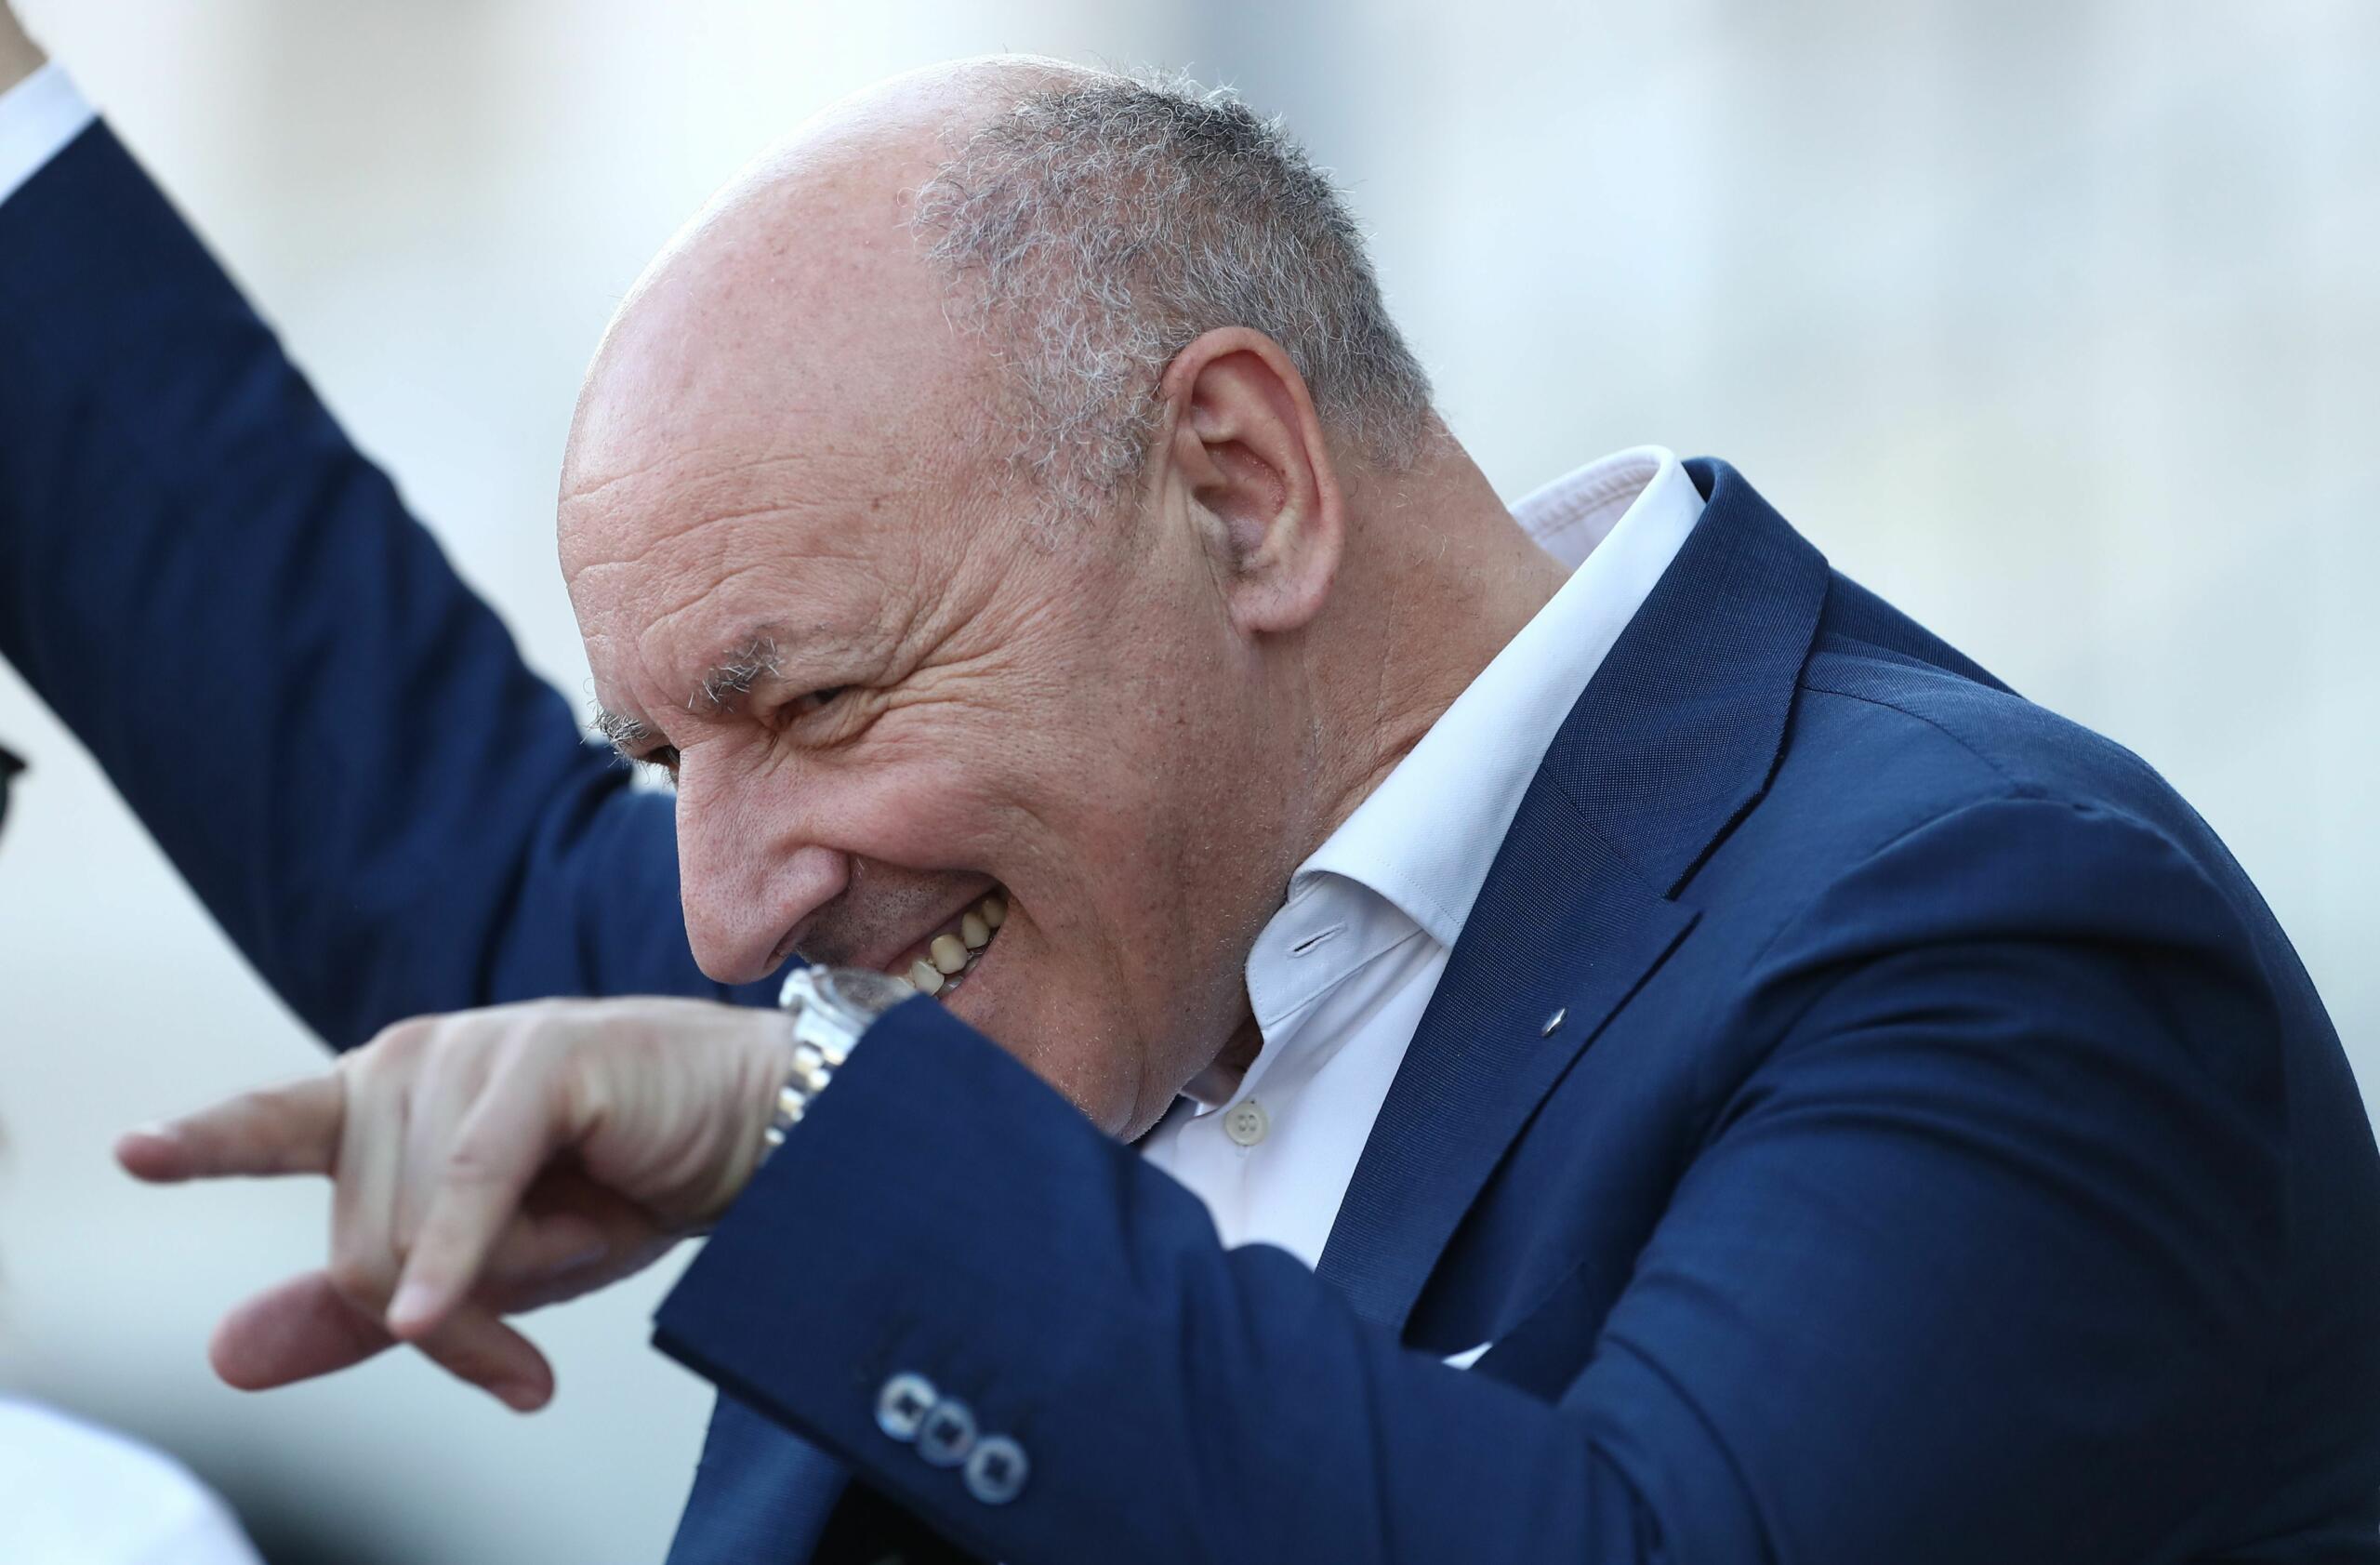 Inter are tending to several contract extensions, and Giuseppe Marotta believes all negotiations will have a positive outcome.